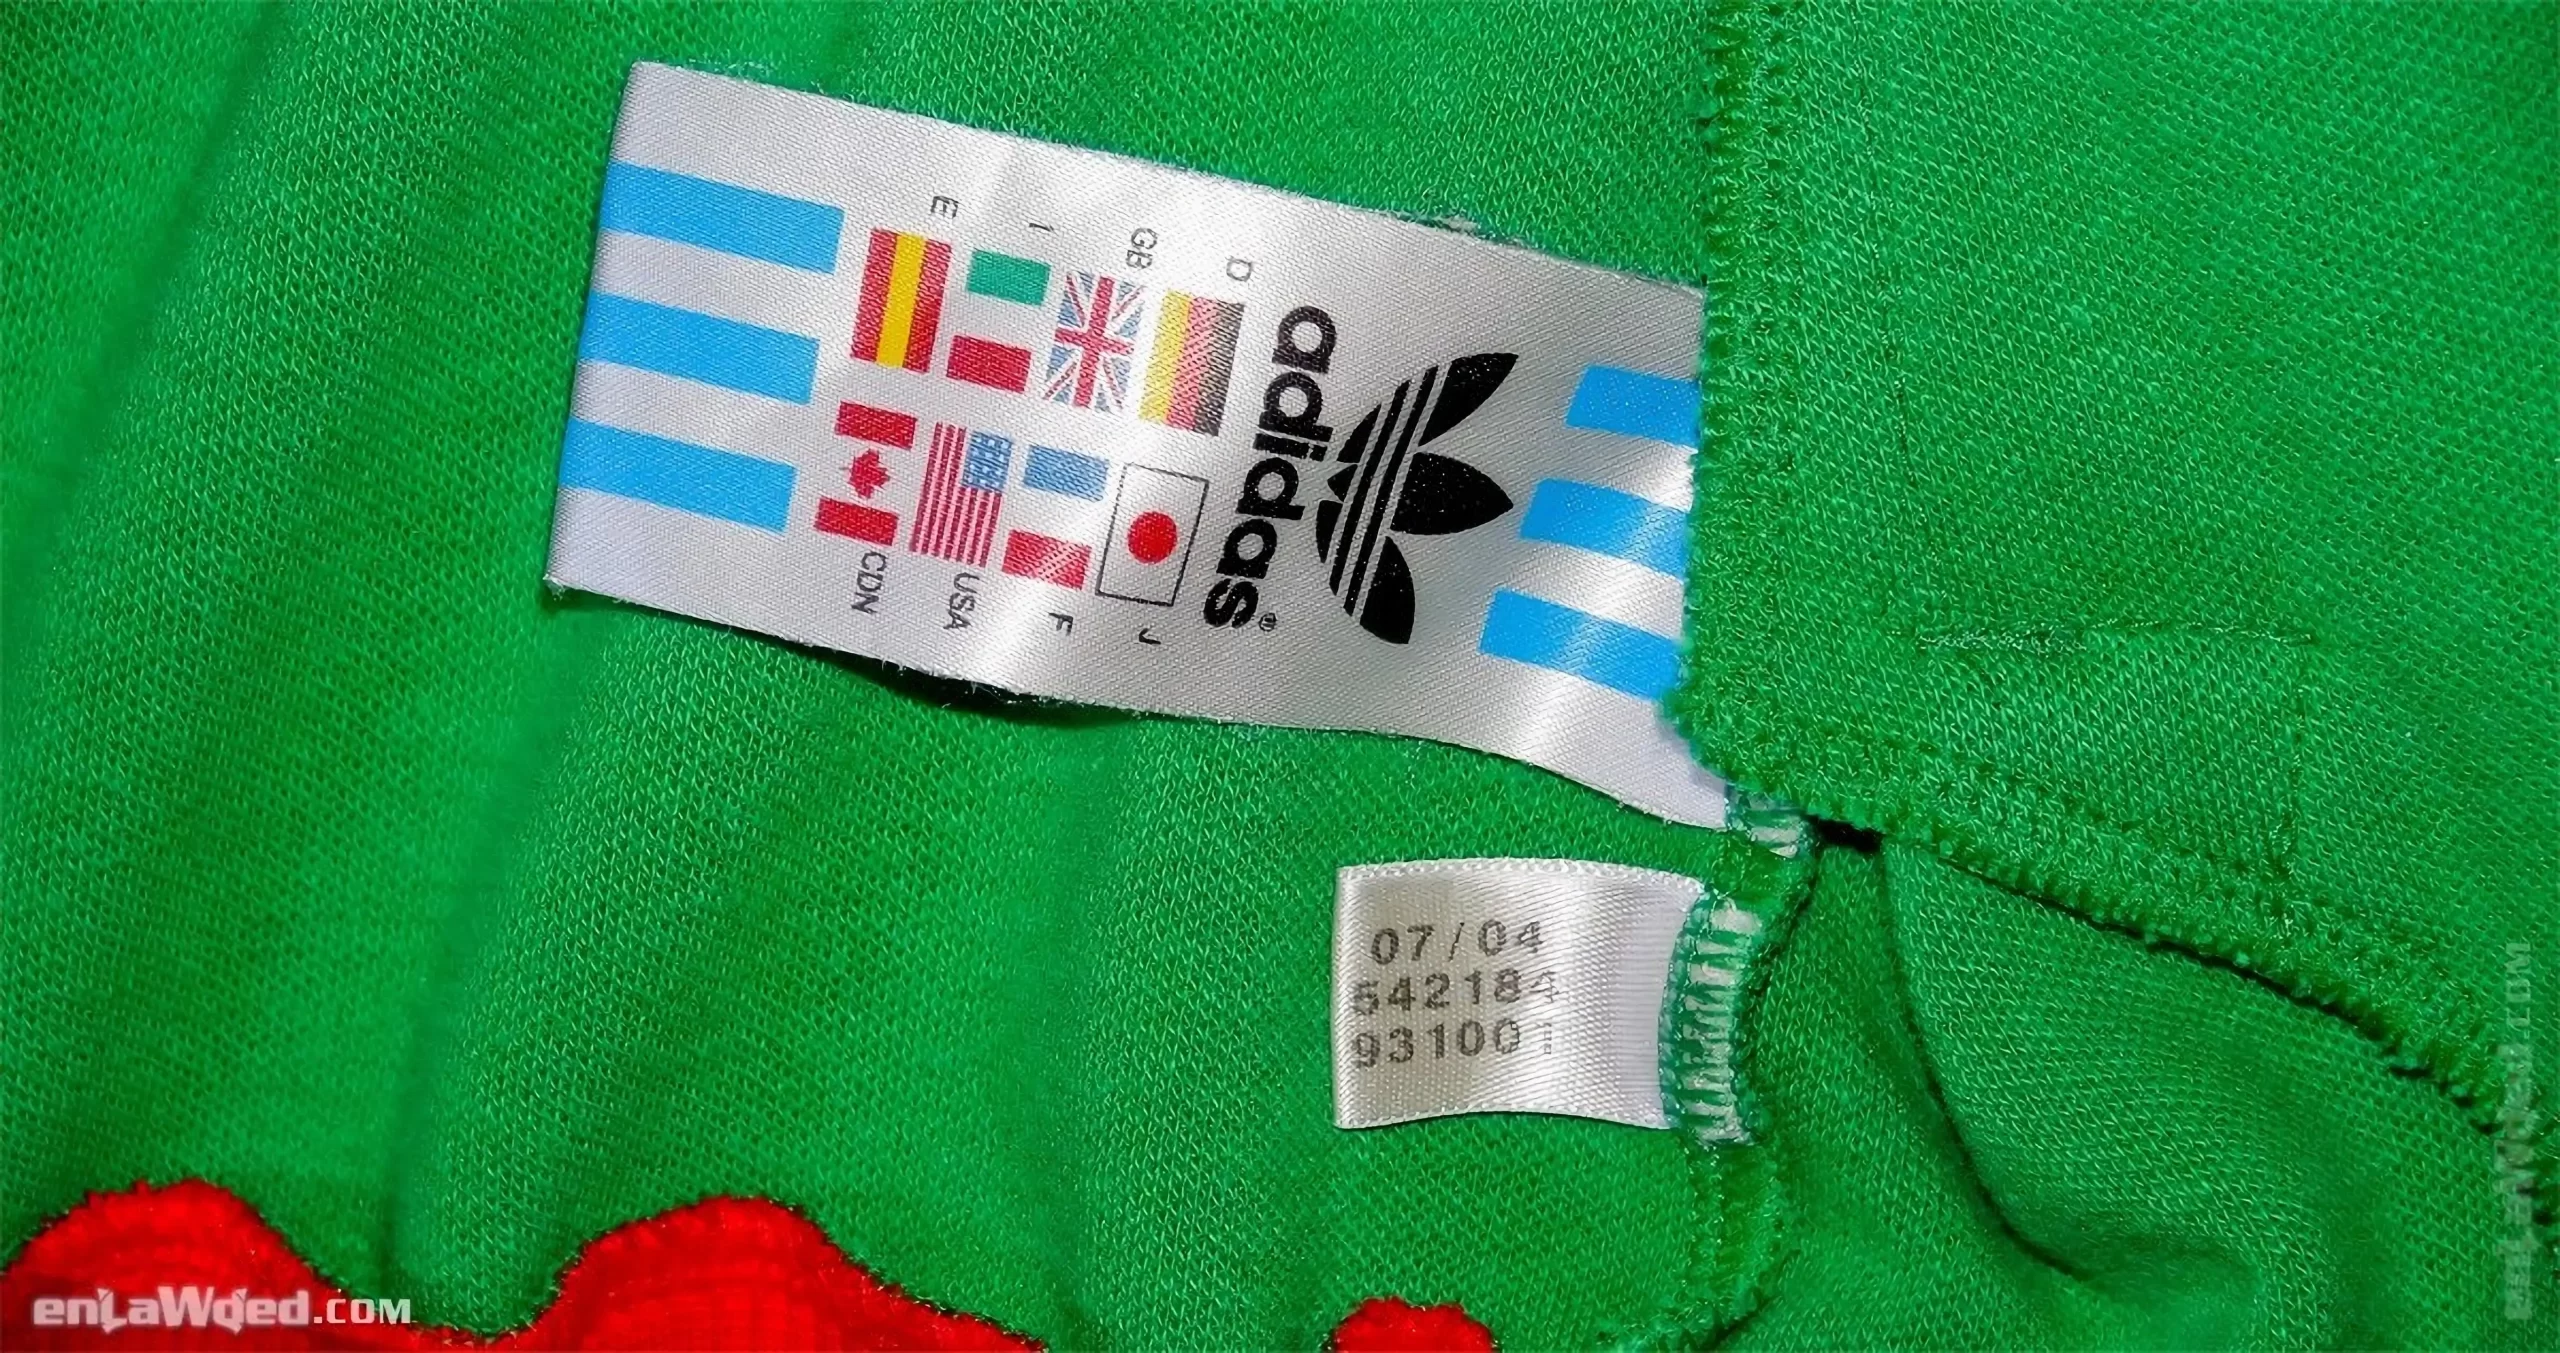 Adidas tag of the Maroc 1984 track top, with the month and year of fabrication: 07/2004